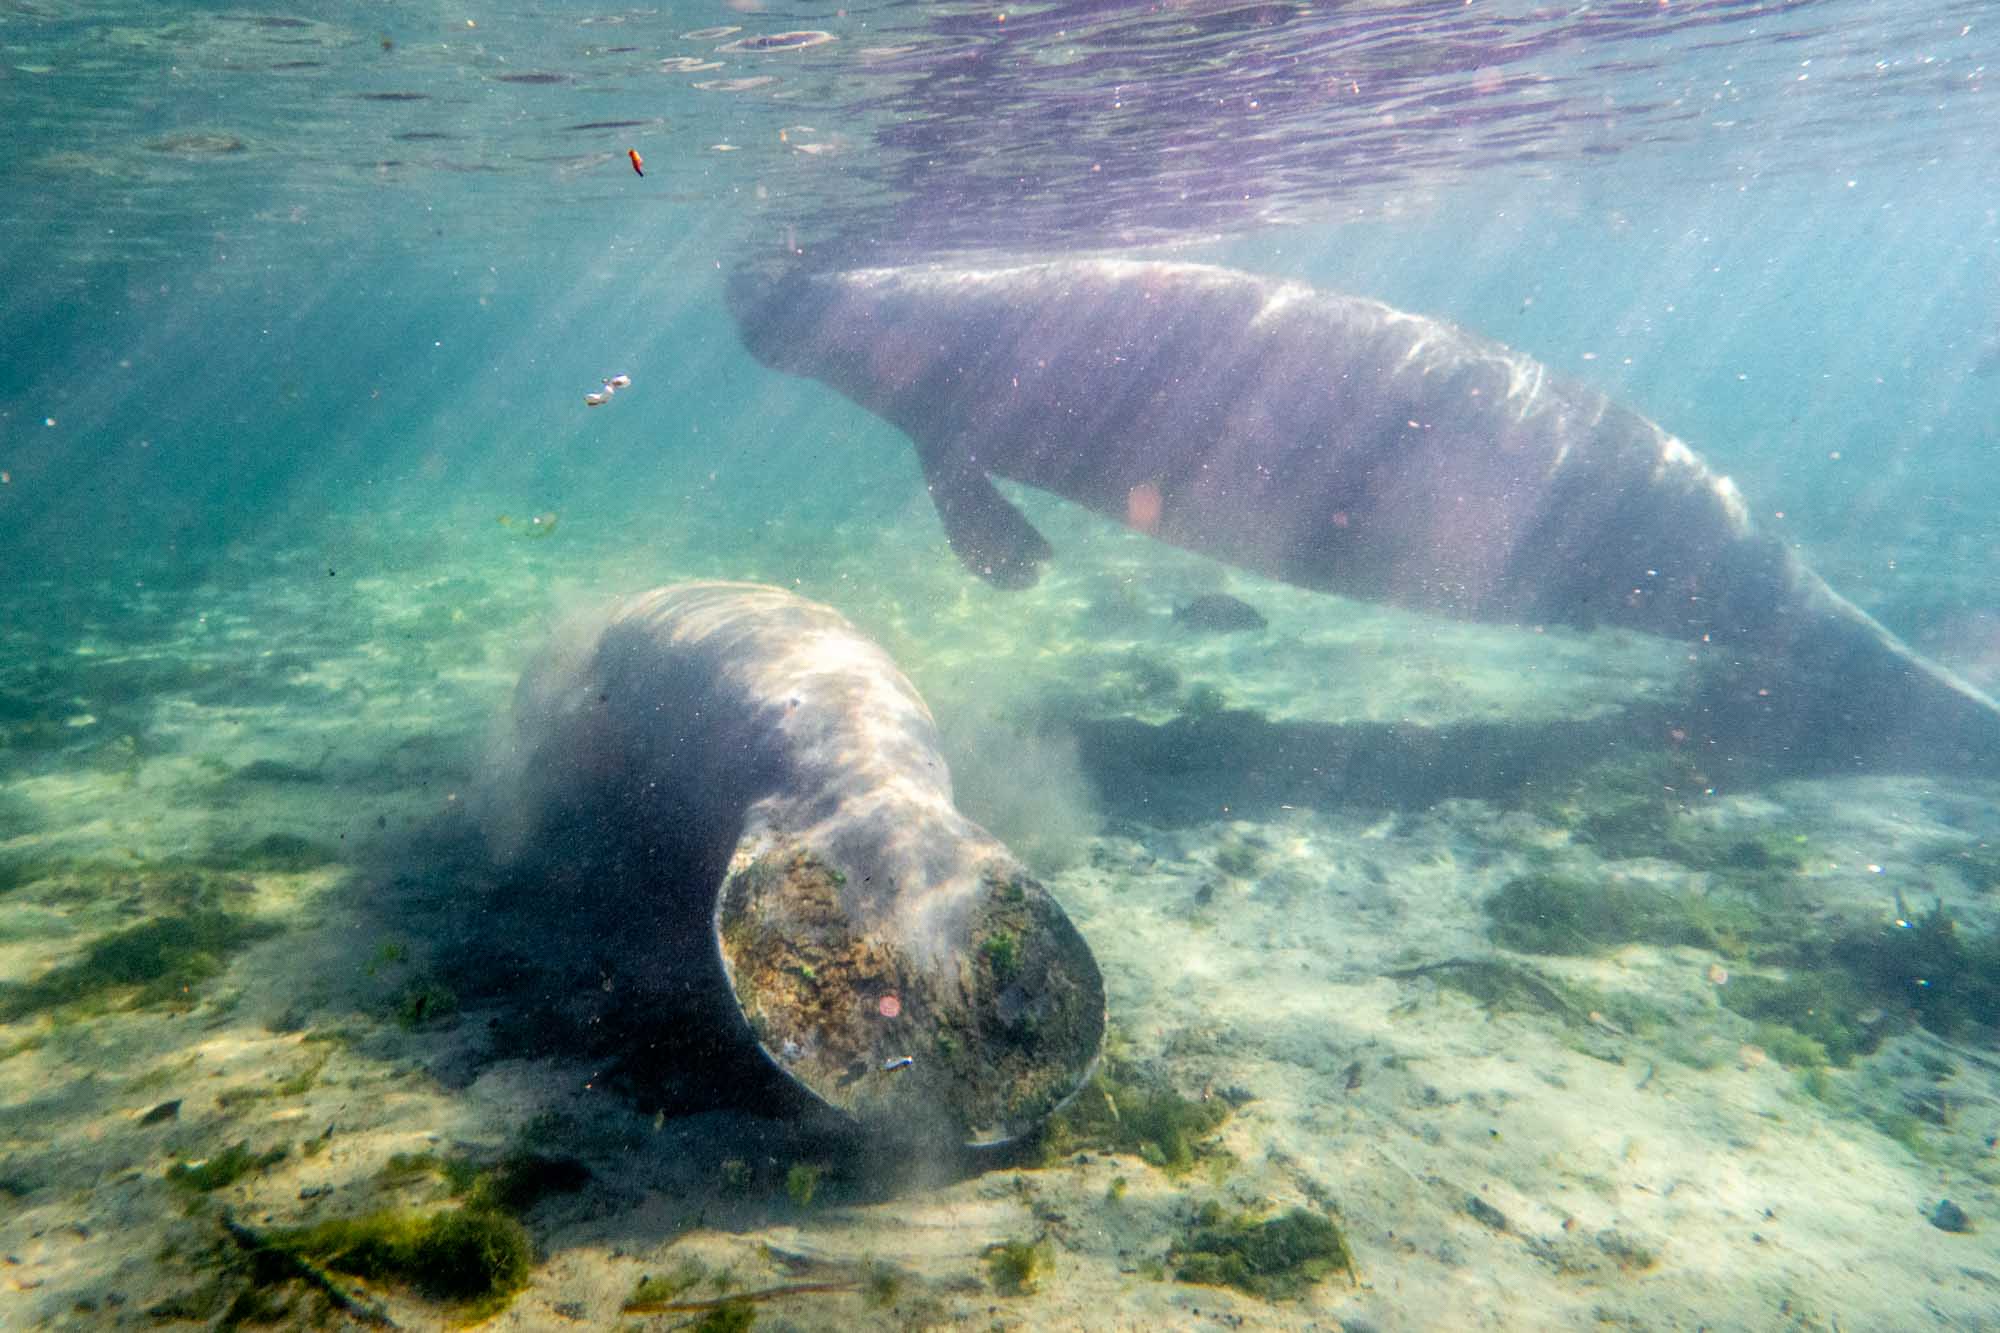 Two manatees in river, one surfacing to breath